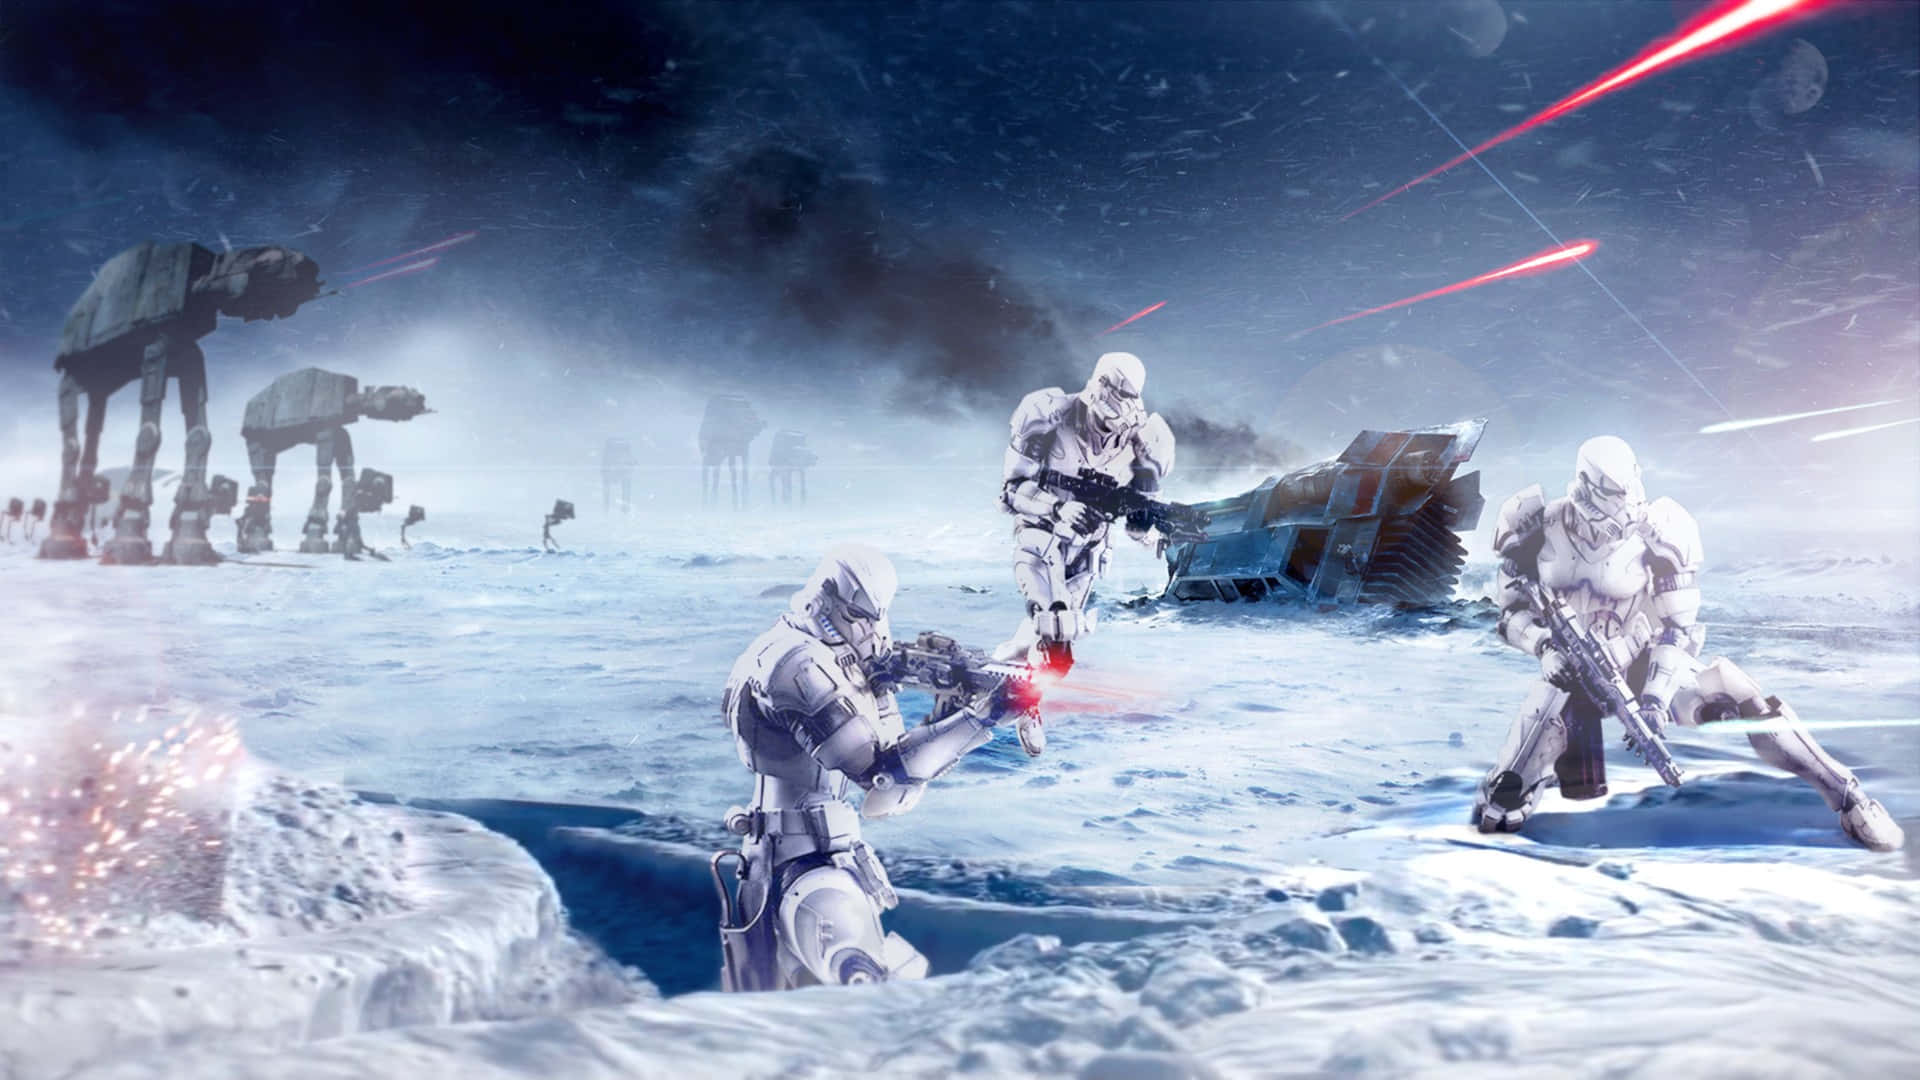 Imperial Forces Engage the Rebel Alliance in the Battle Of Hoth Wallpaper